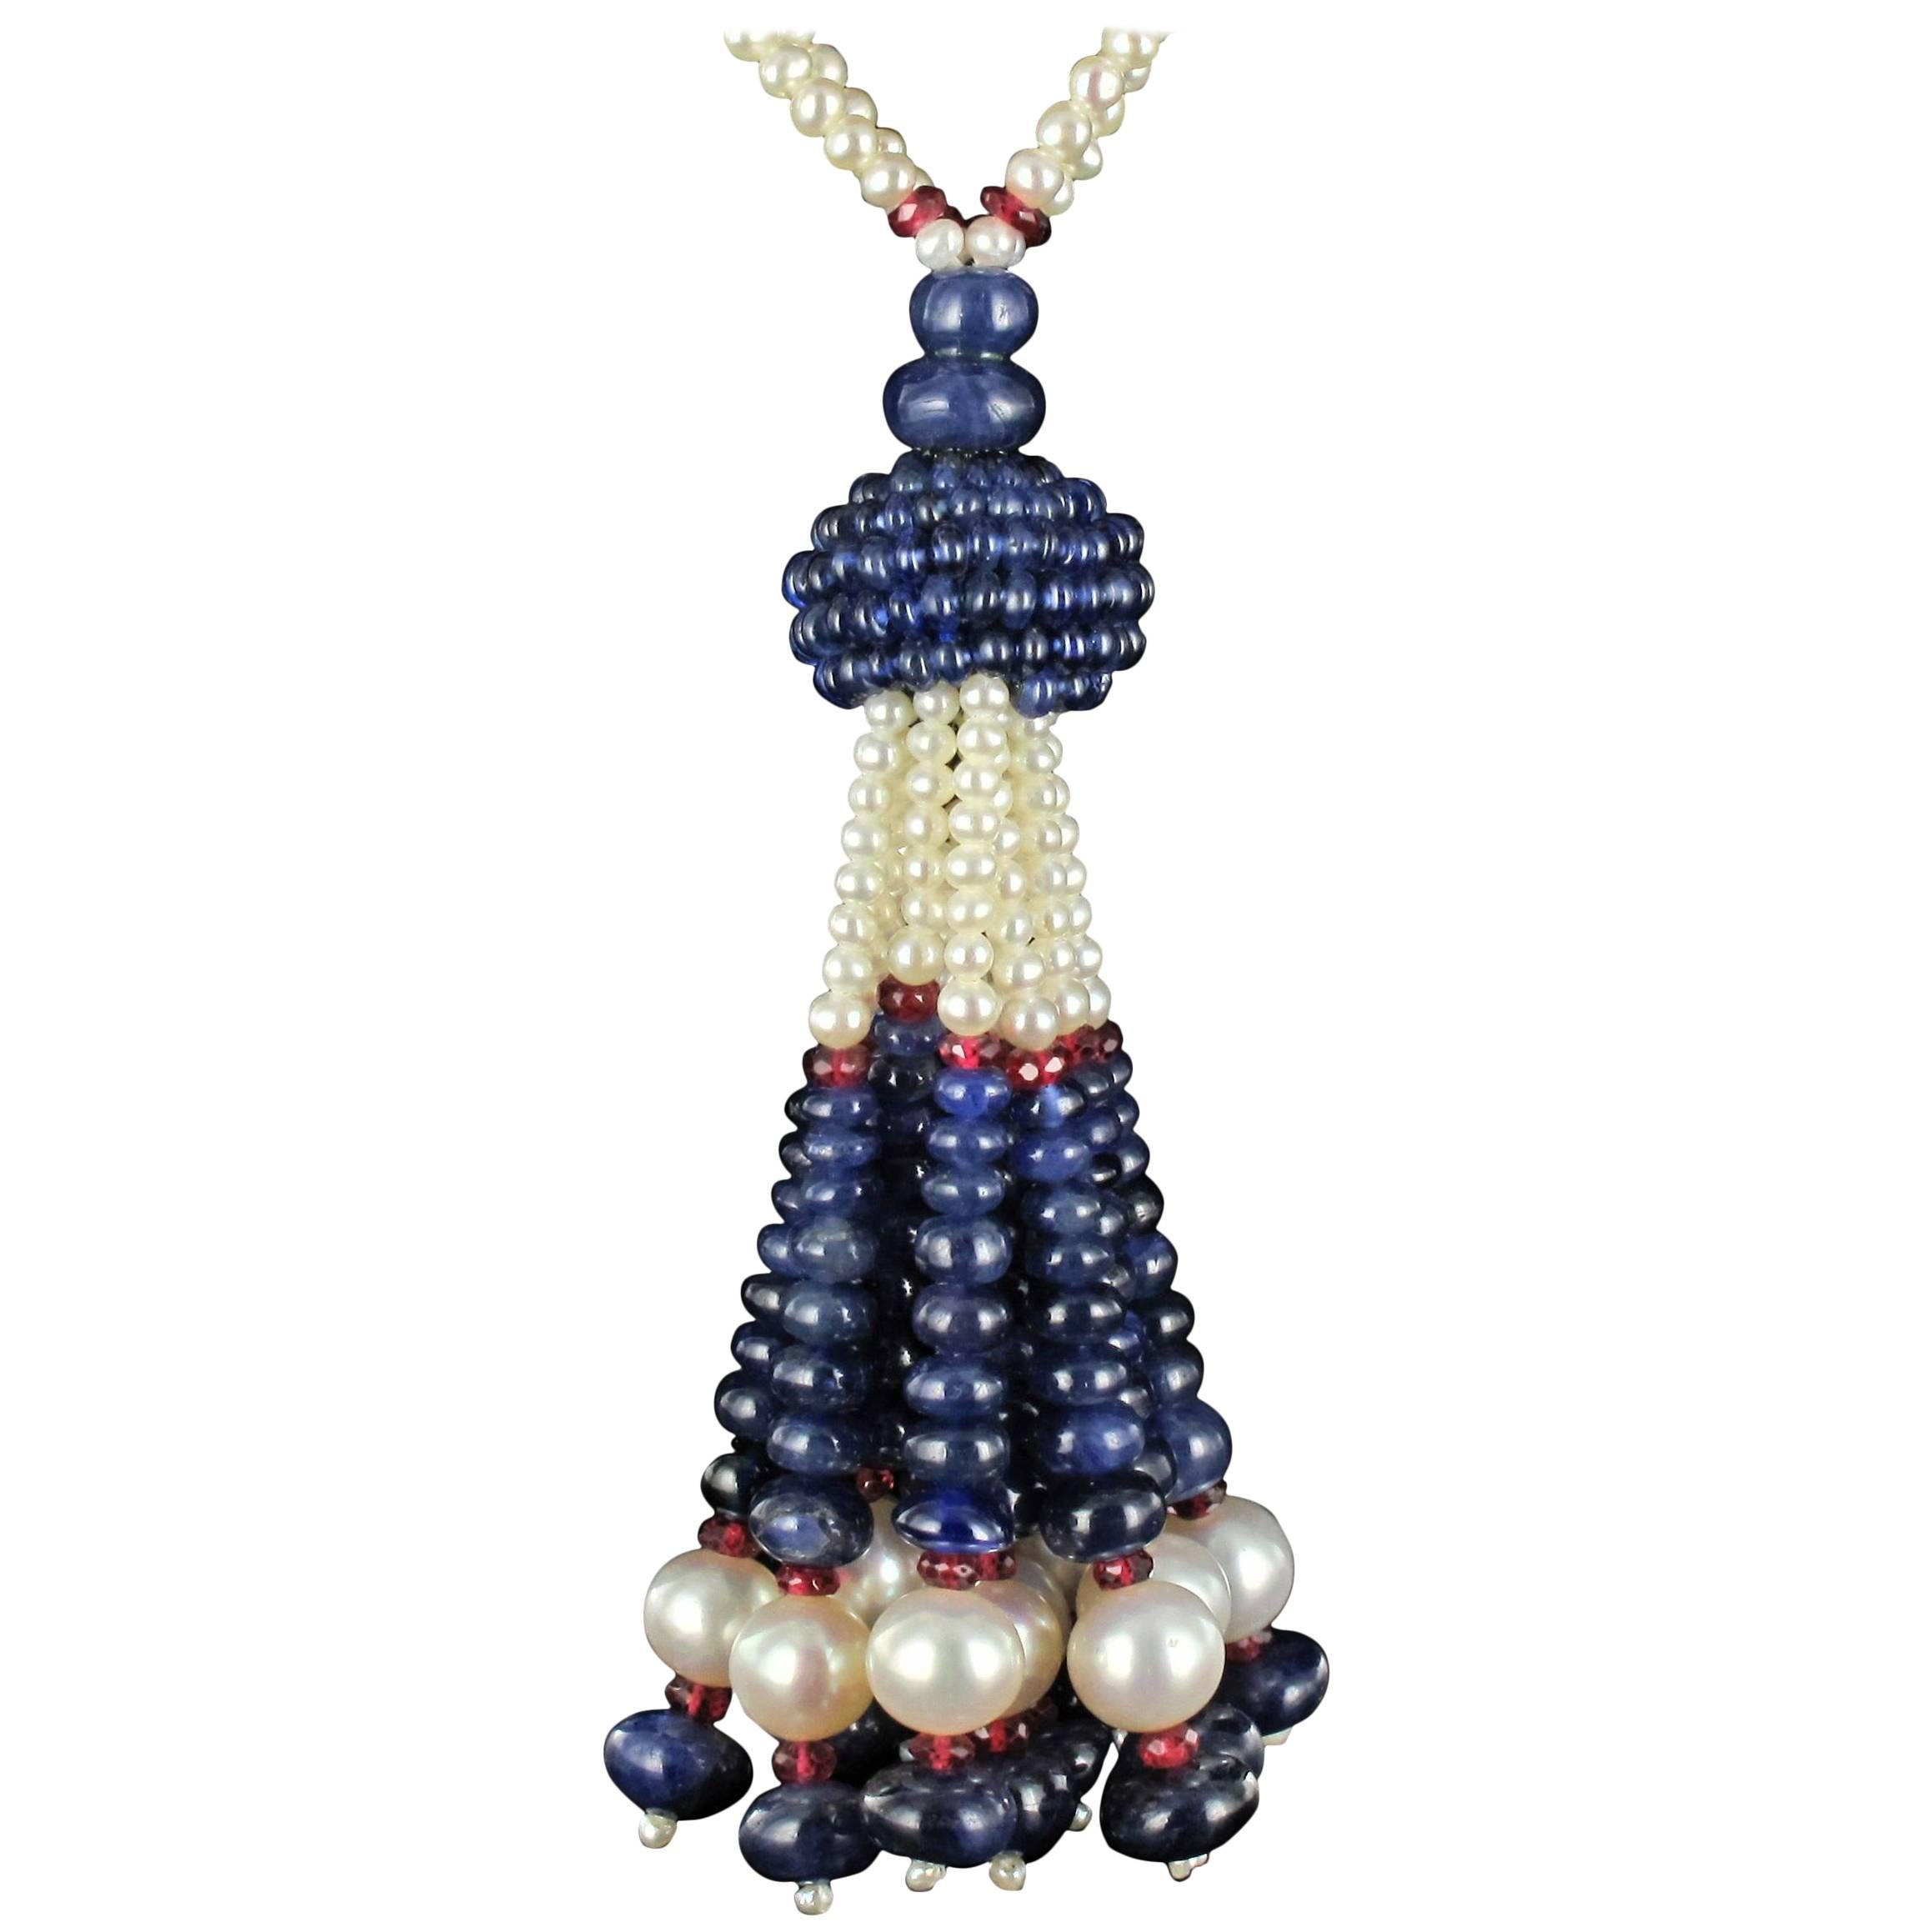 Sapphire Beads Cultured Pearls Tourmalines Beads Pompom Pendant Necklace 